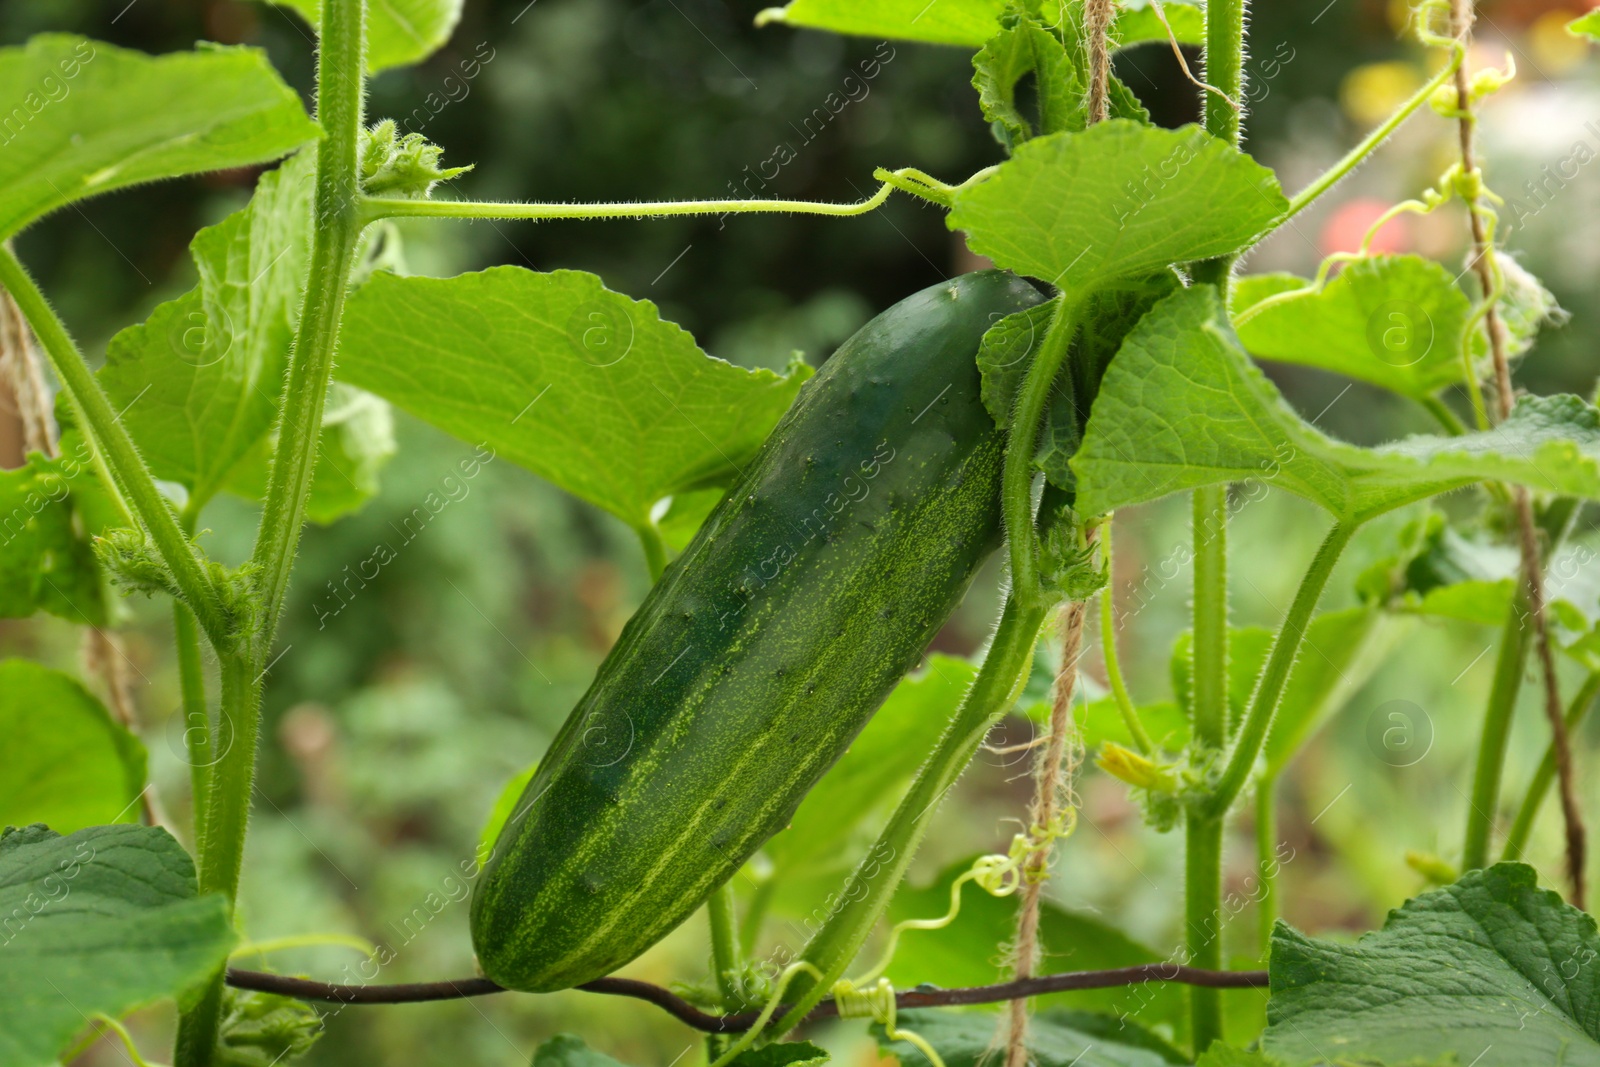 Photo of Cucumber ripening on bush against blurred background, closeup